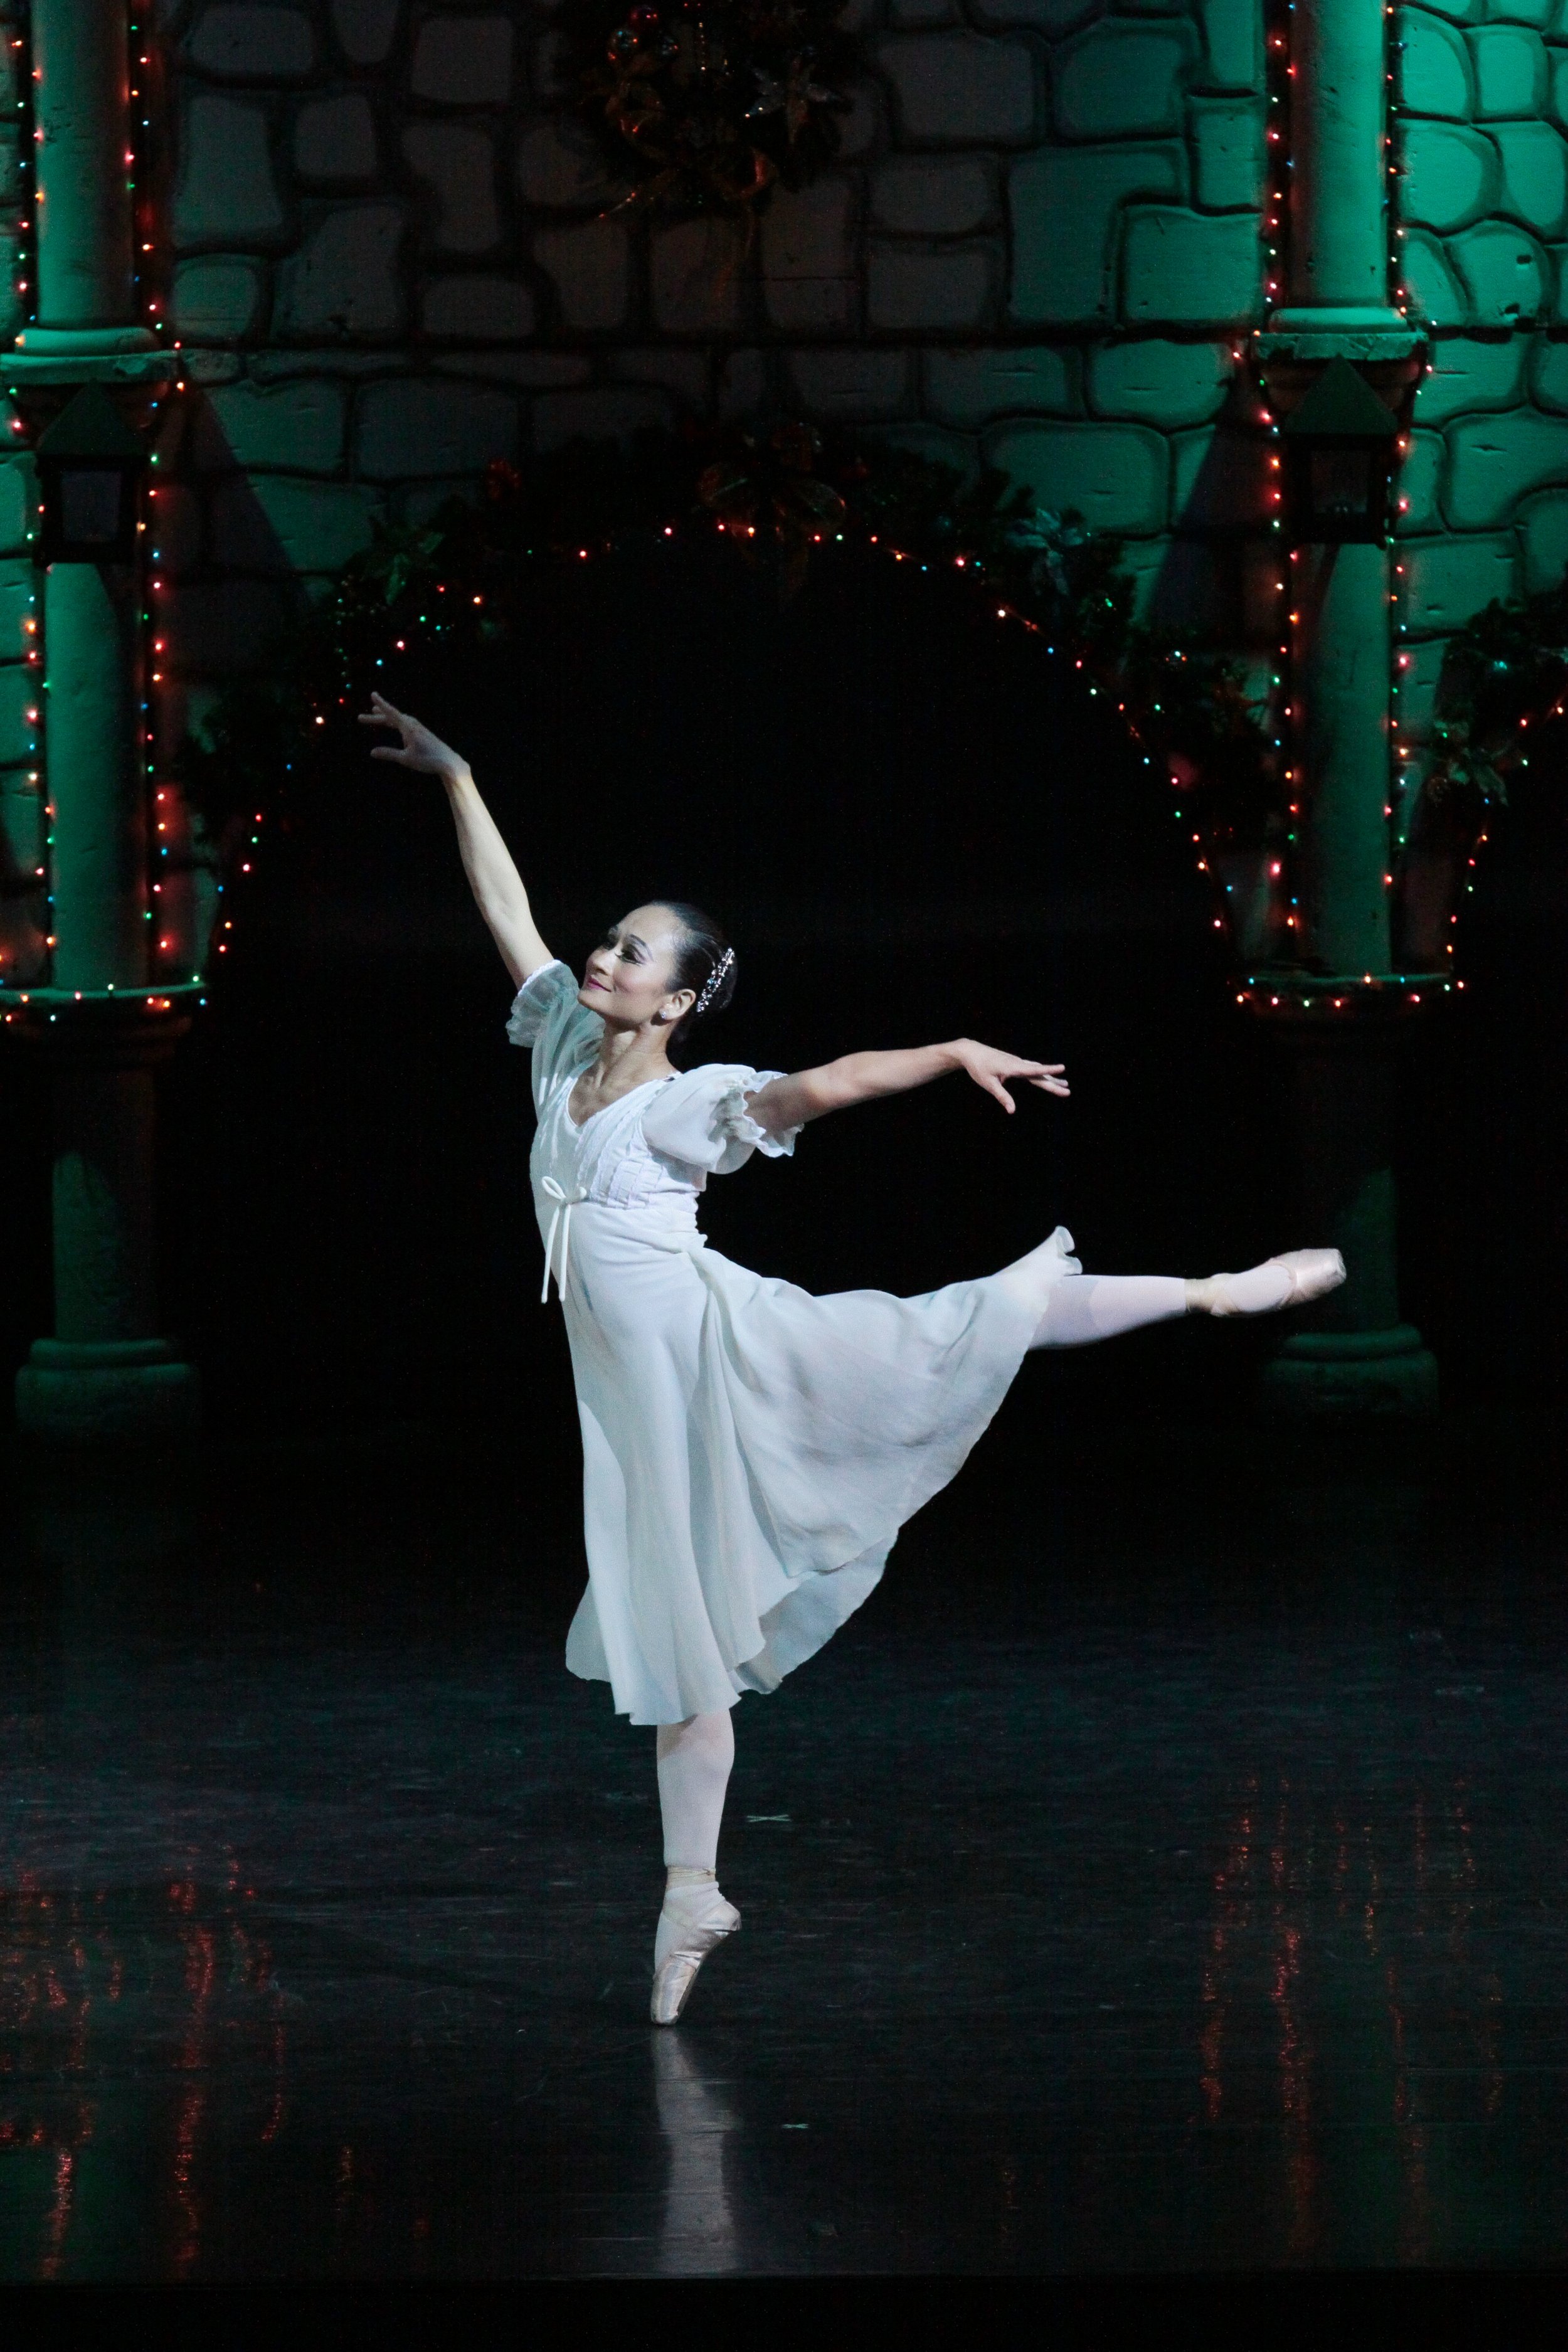    Lisa Macuja-Elizalde performs a ballet number set to a familiar Christmas hymn.   